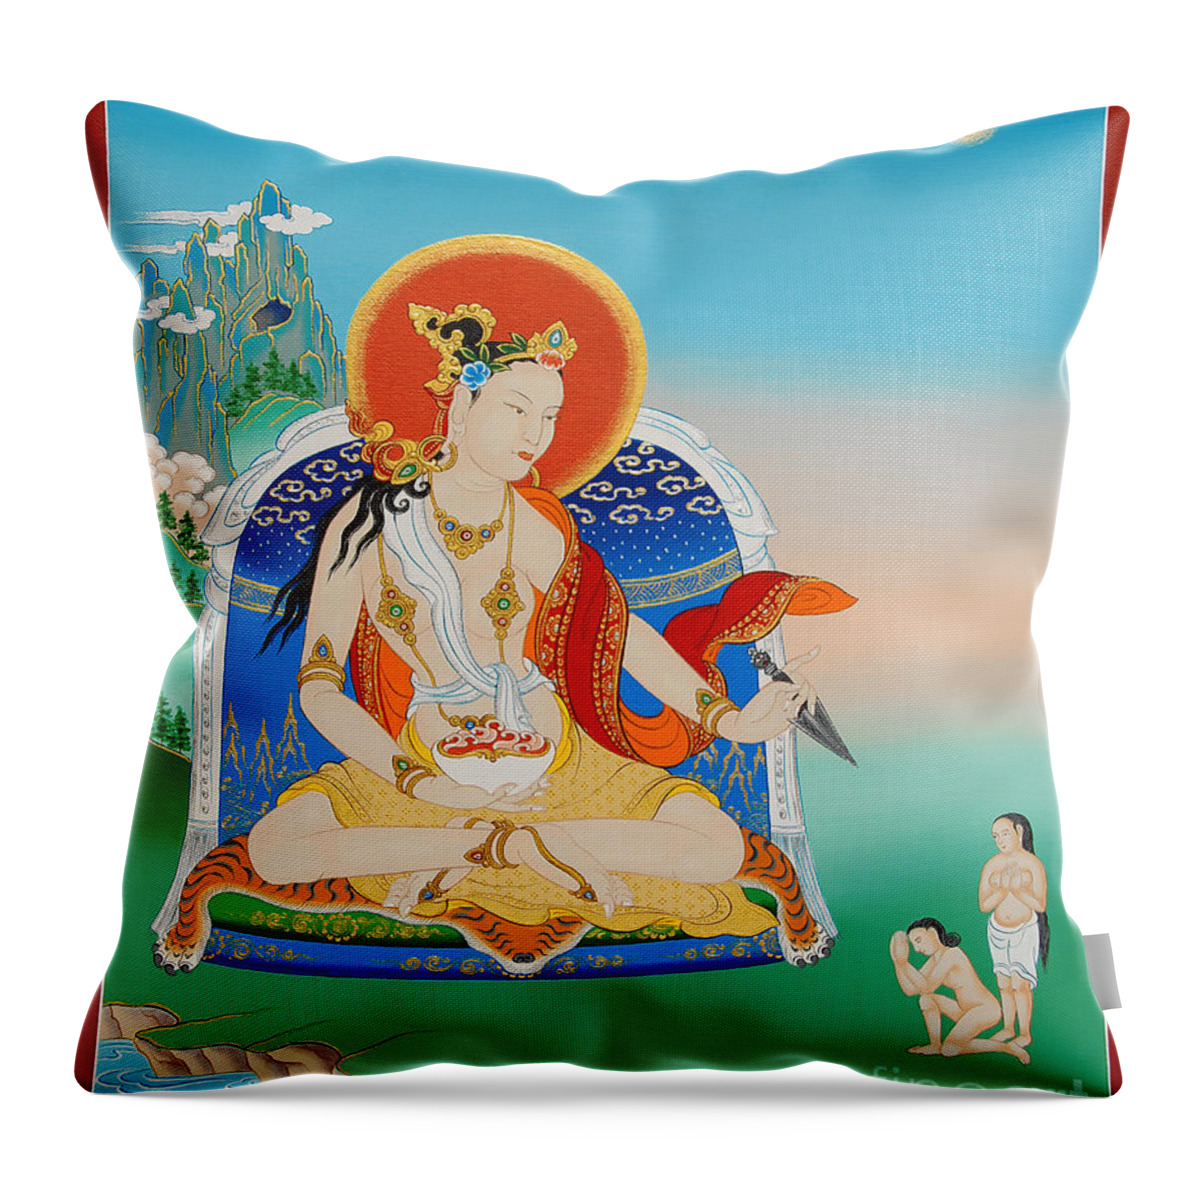 Yeshe Tsogyal Throw Pillow featuring the painting Yeshe Tsogyal by Sergey Noskov